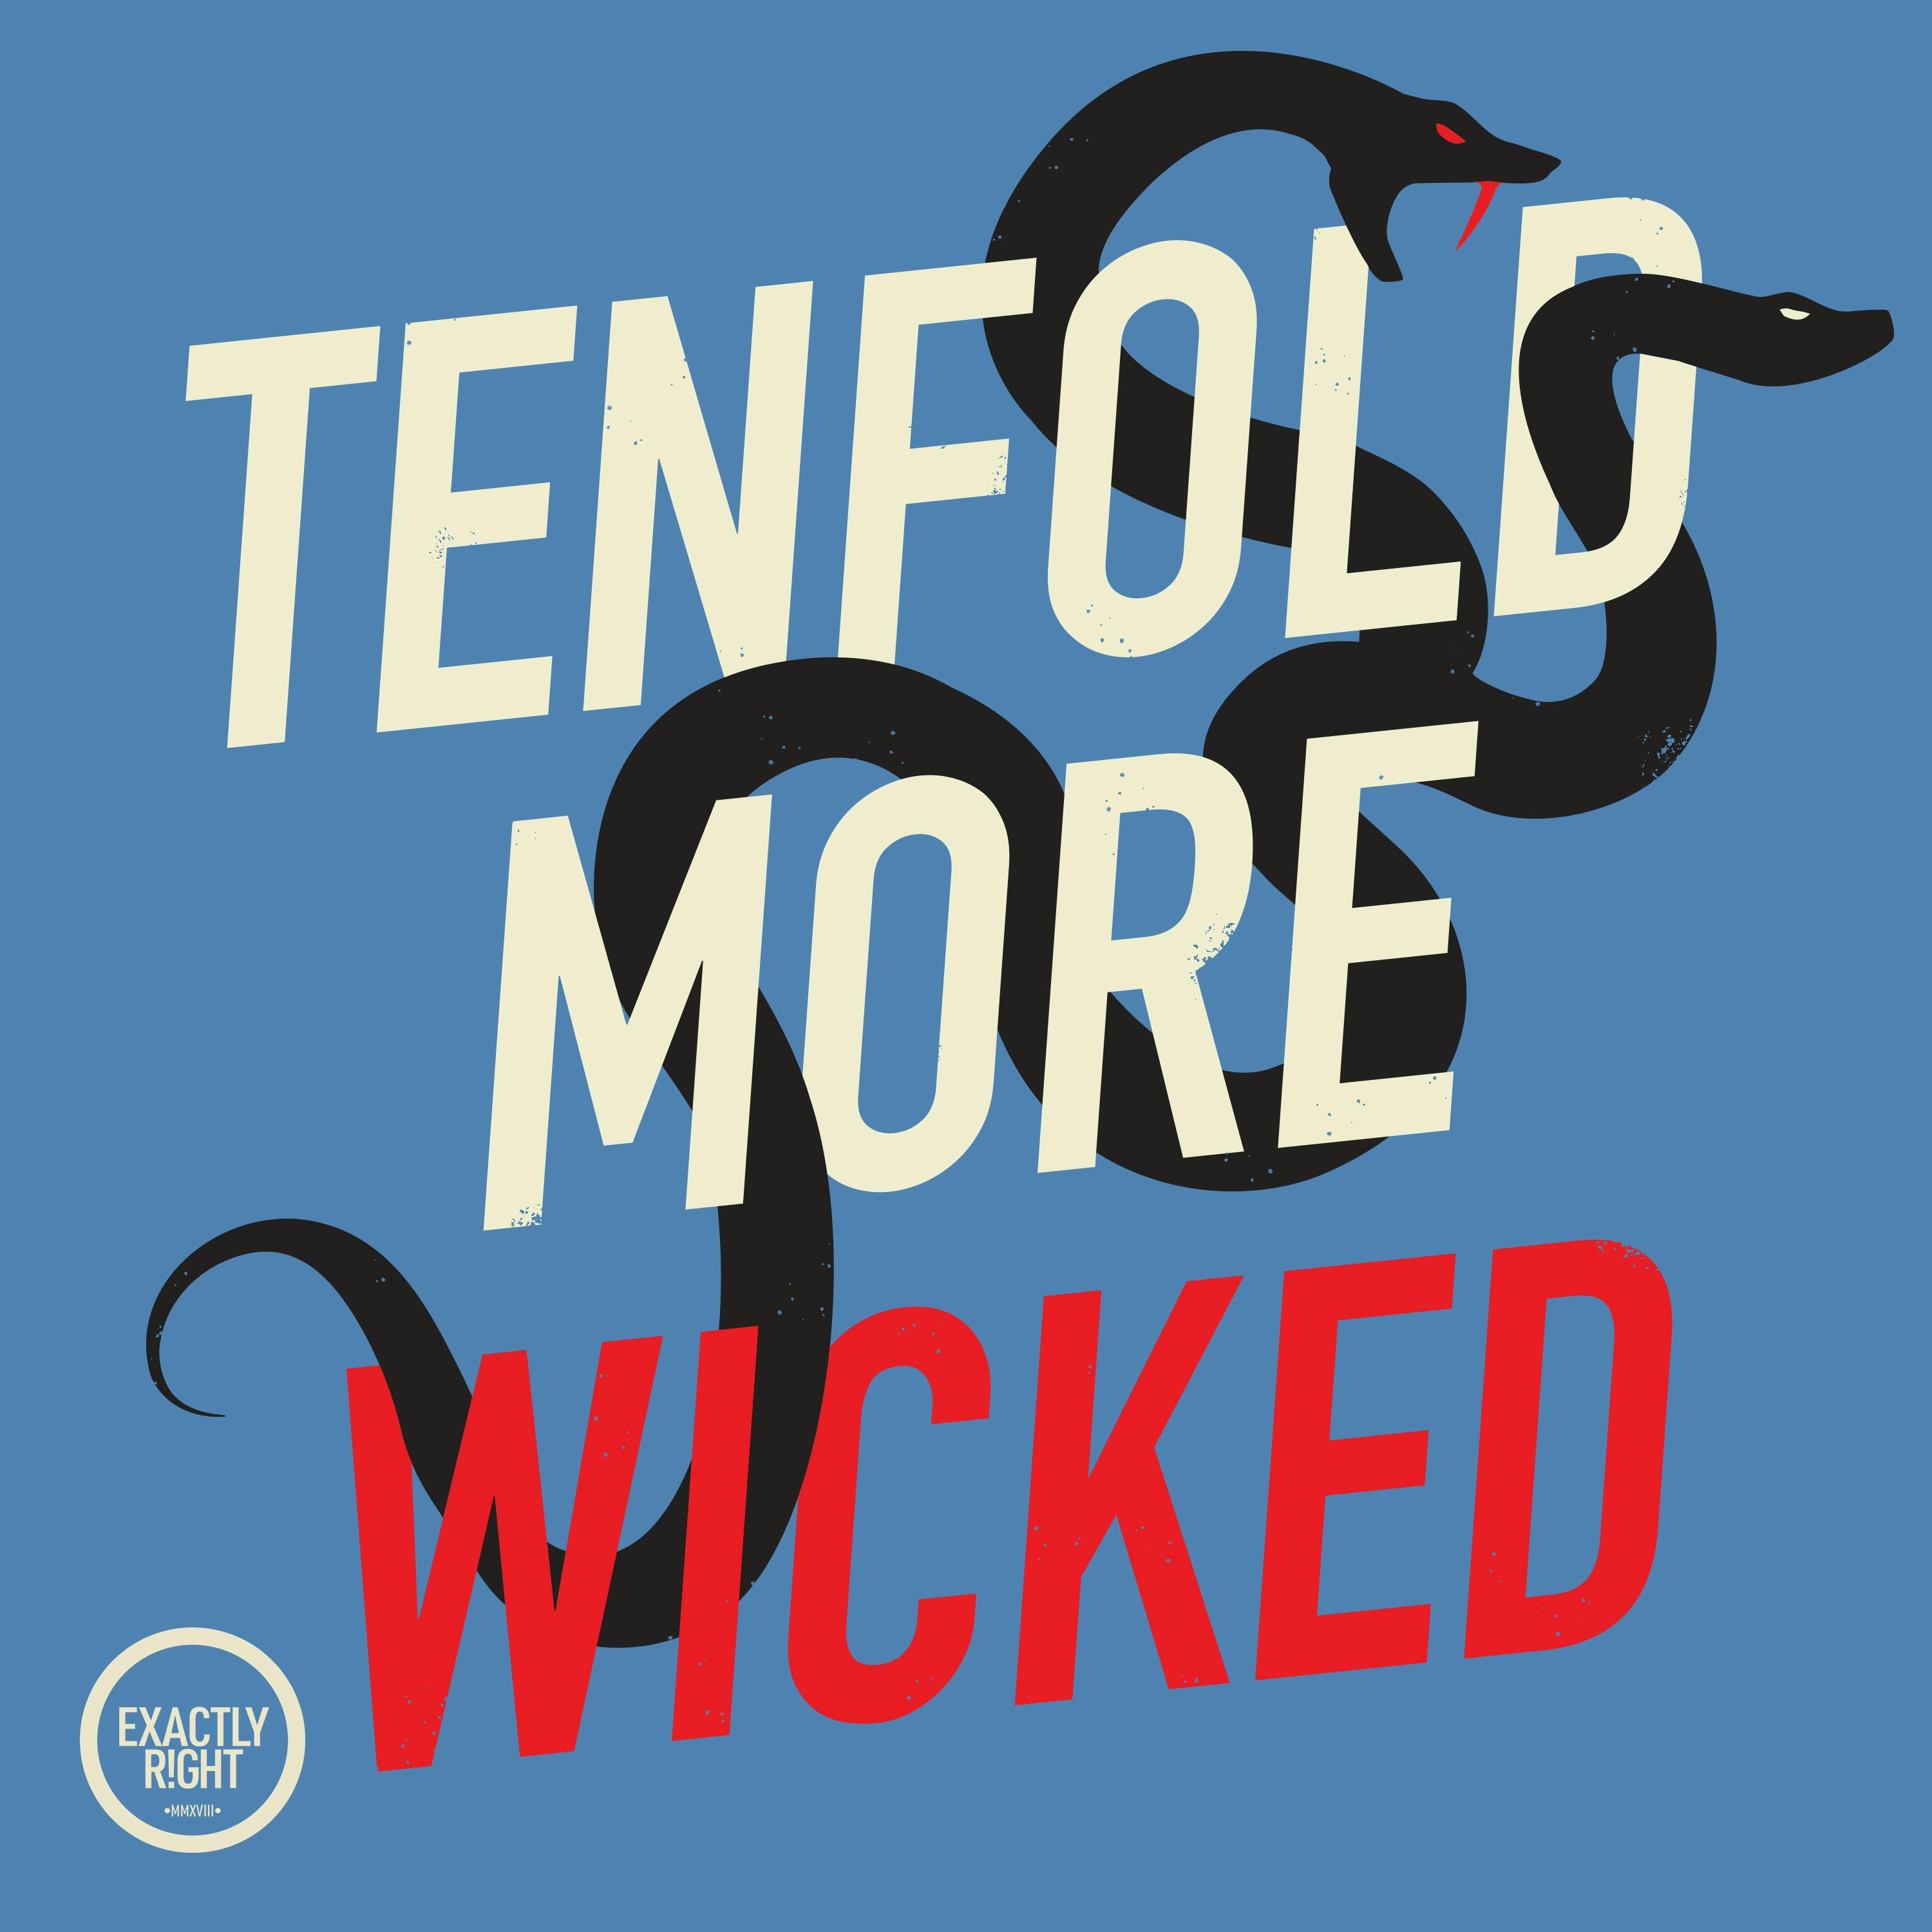 Tenfold More Wicked - Fire and Brimstone: Burned